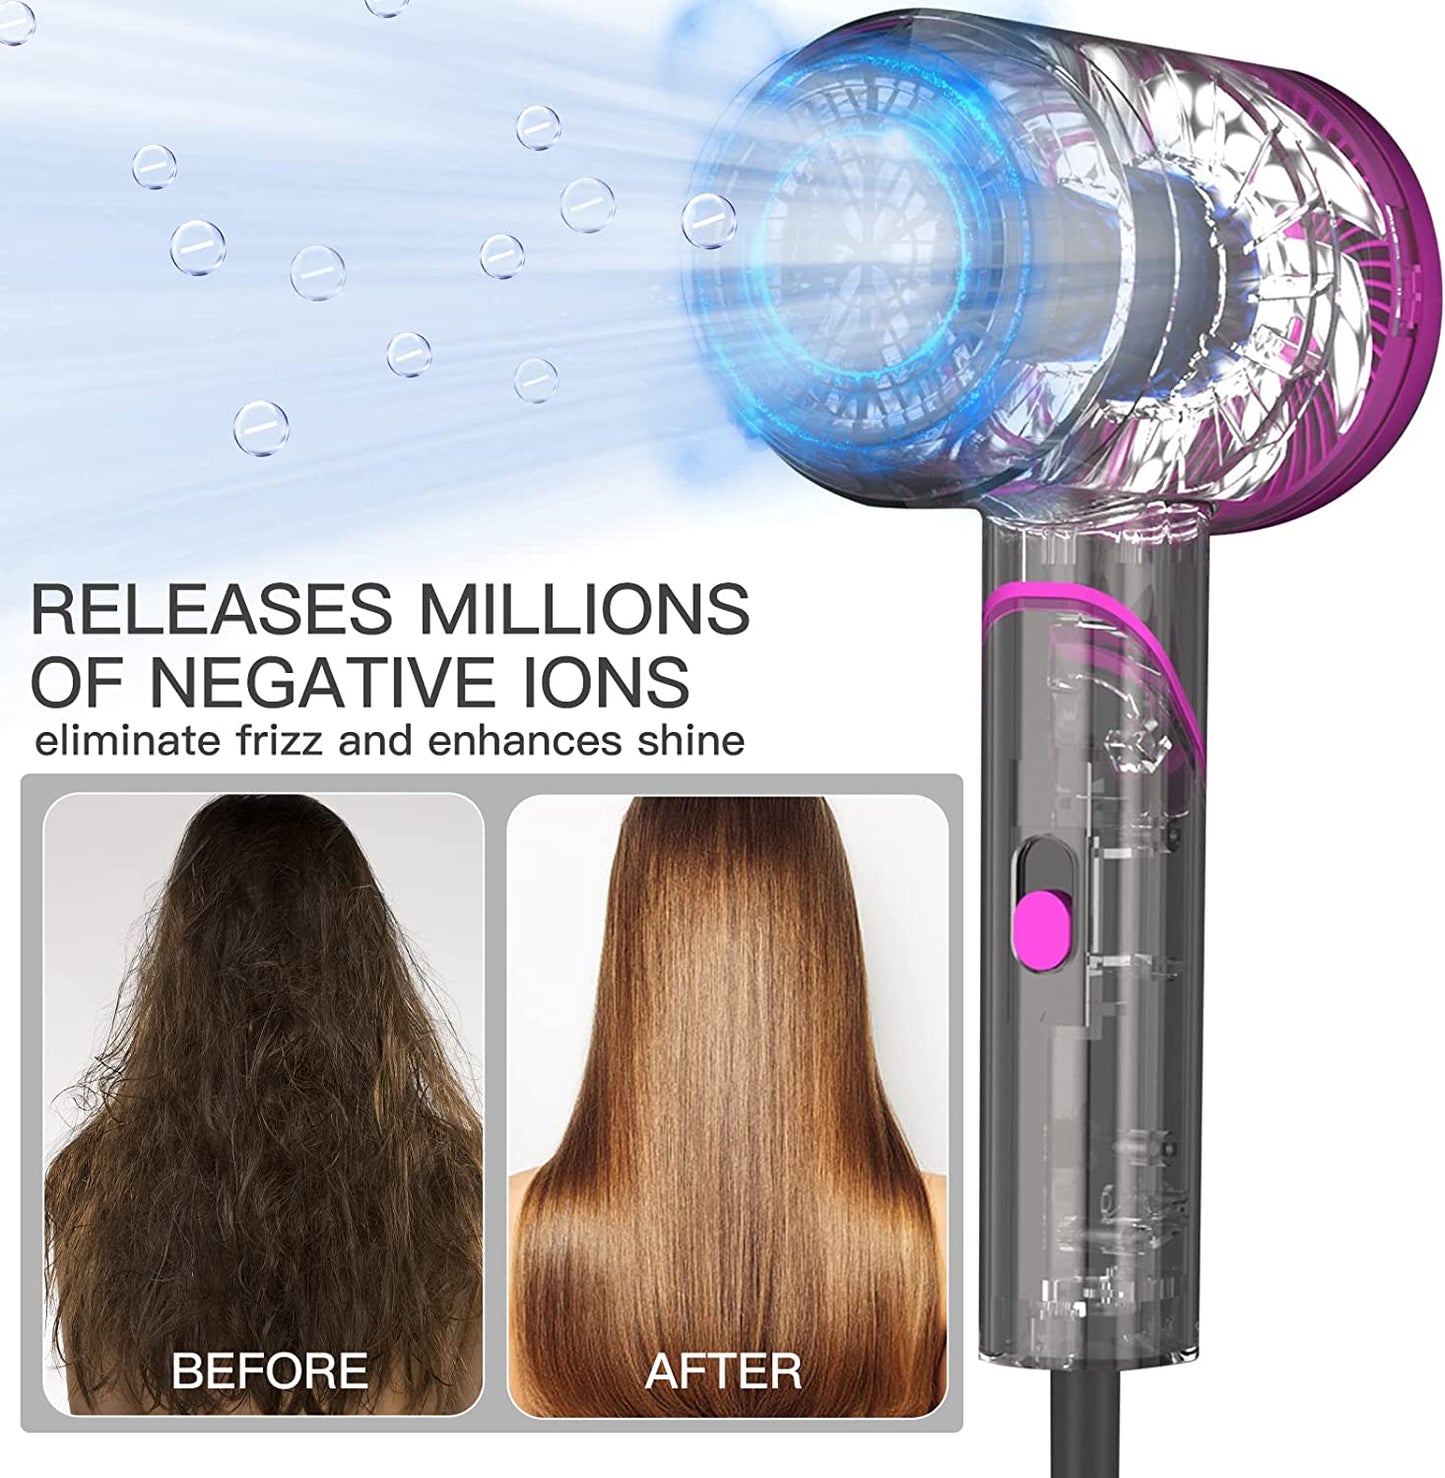 New Hair Dryer Blow Dryer with Diffuser - 1800W Professional Travel Ionic Hair Dryer